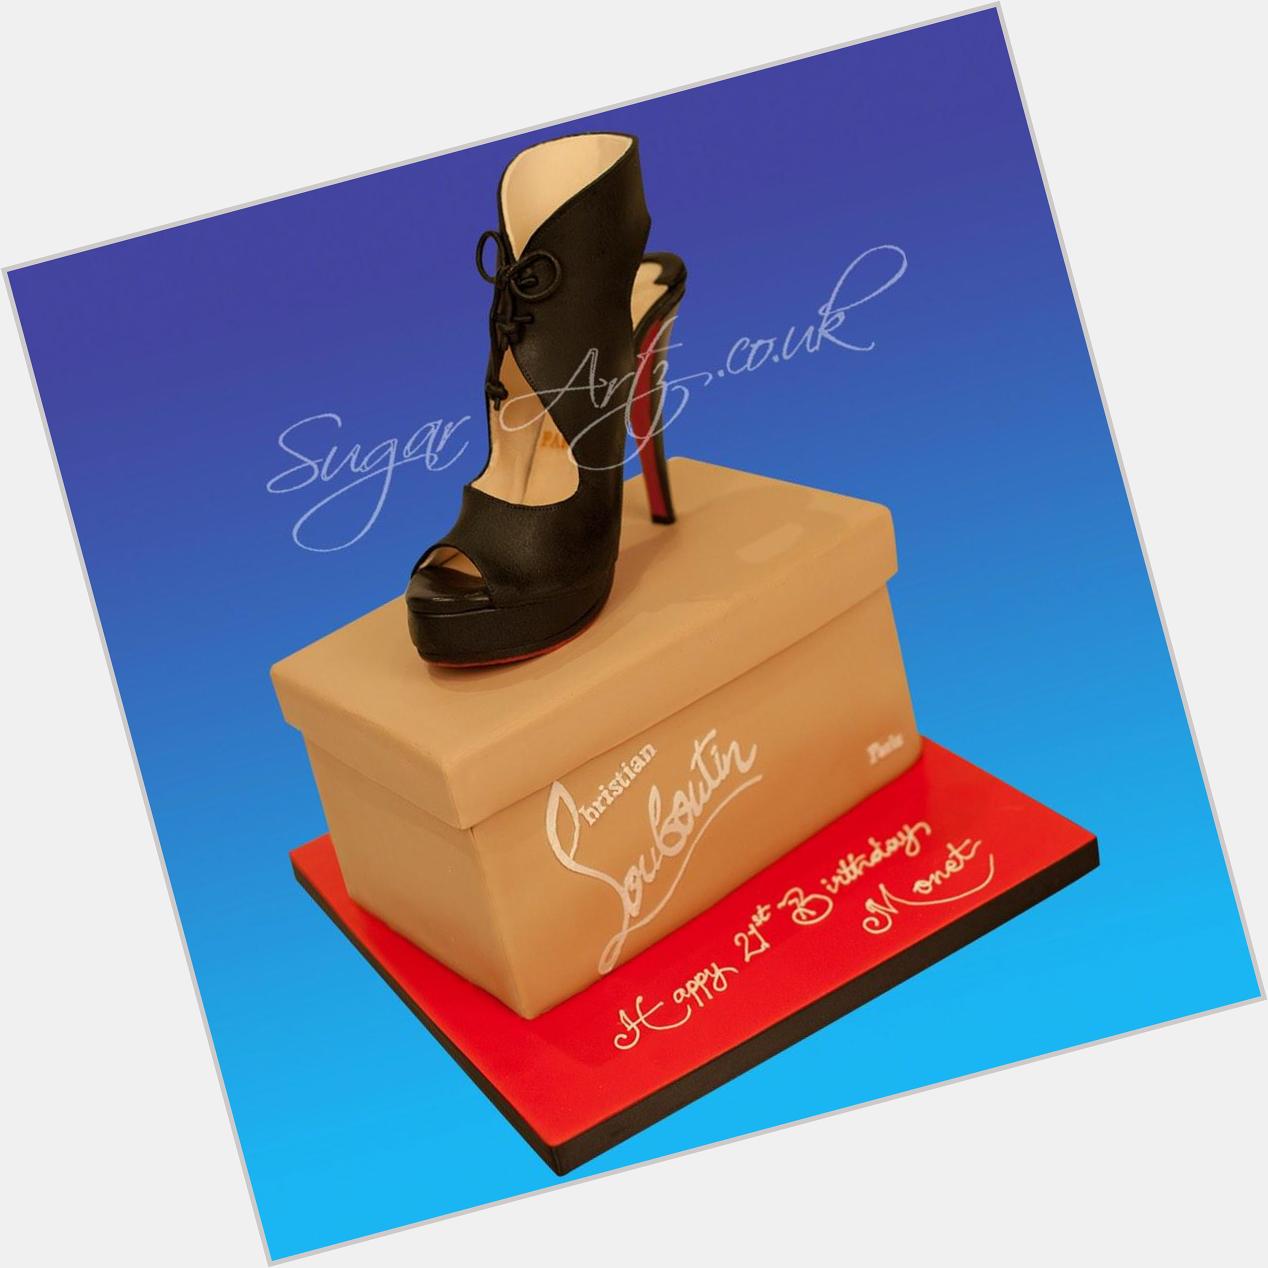 For Monet it could only be Christian Louboutin with the signature red heel.  Happy Birthday Monet! 